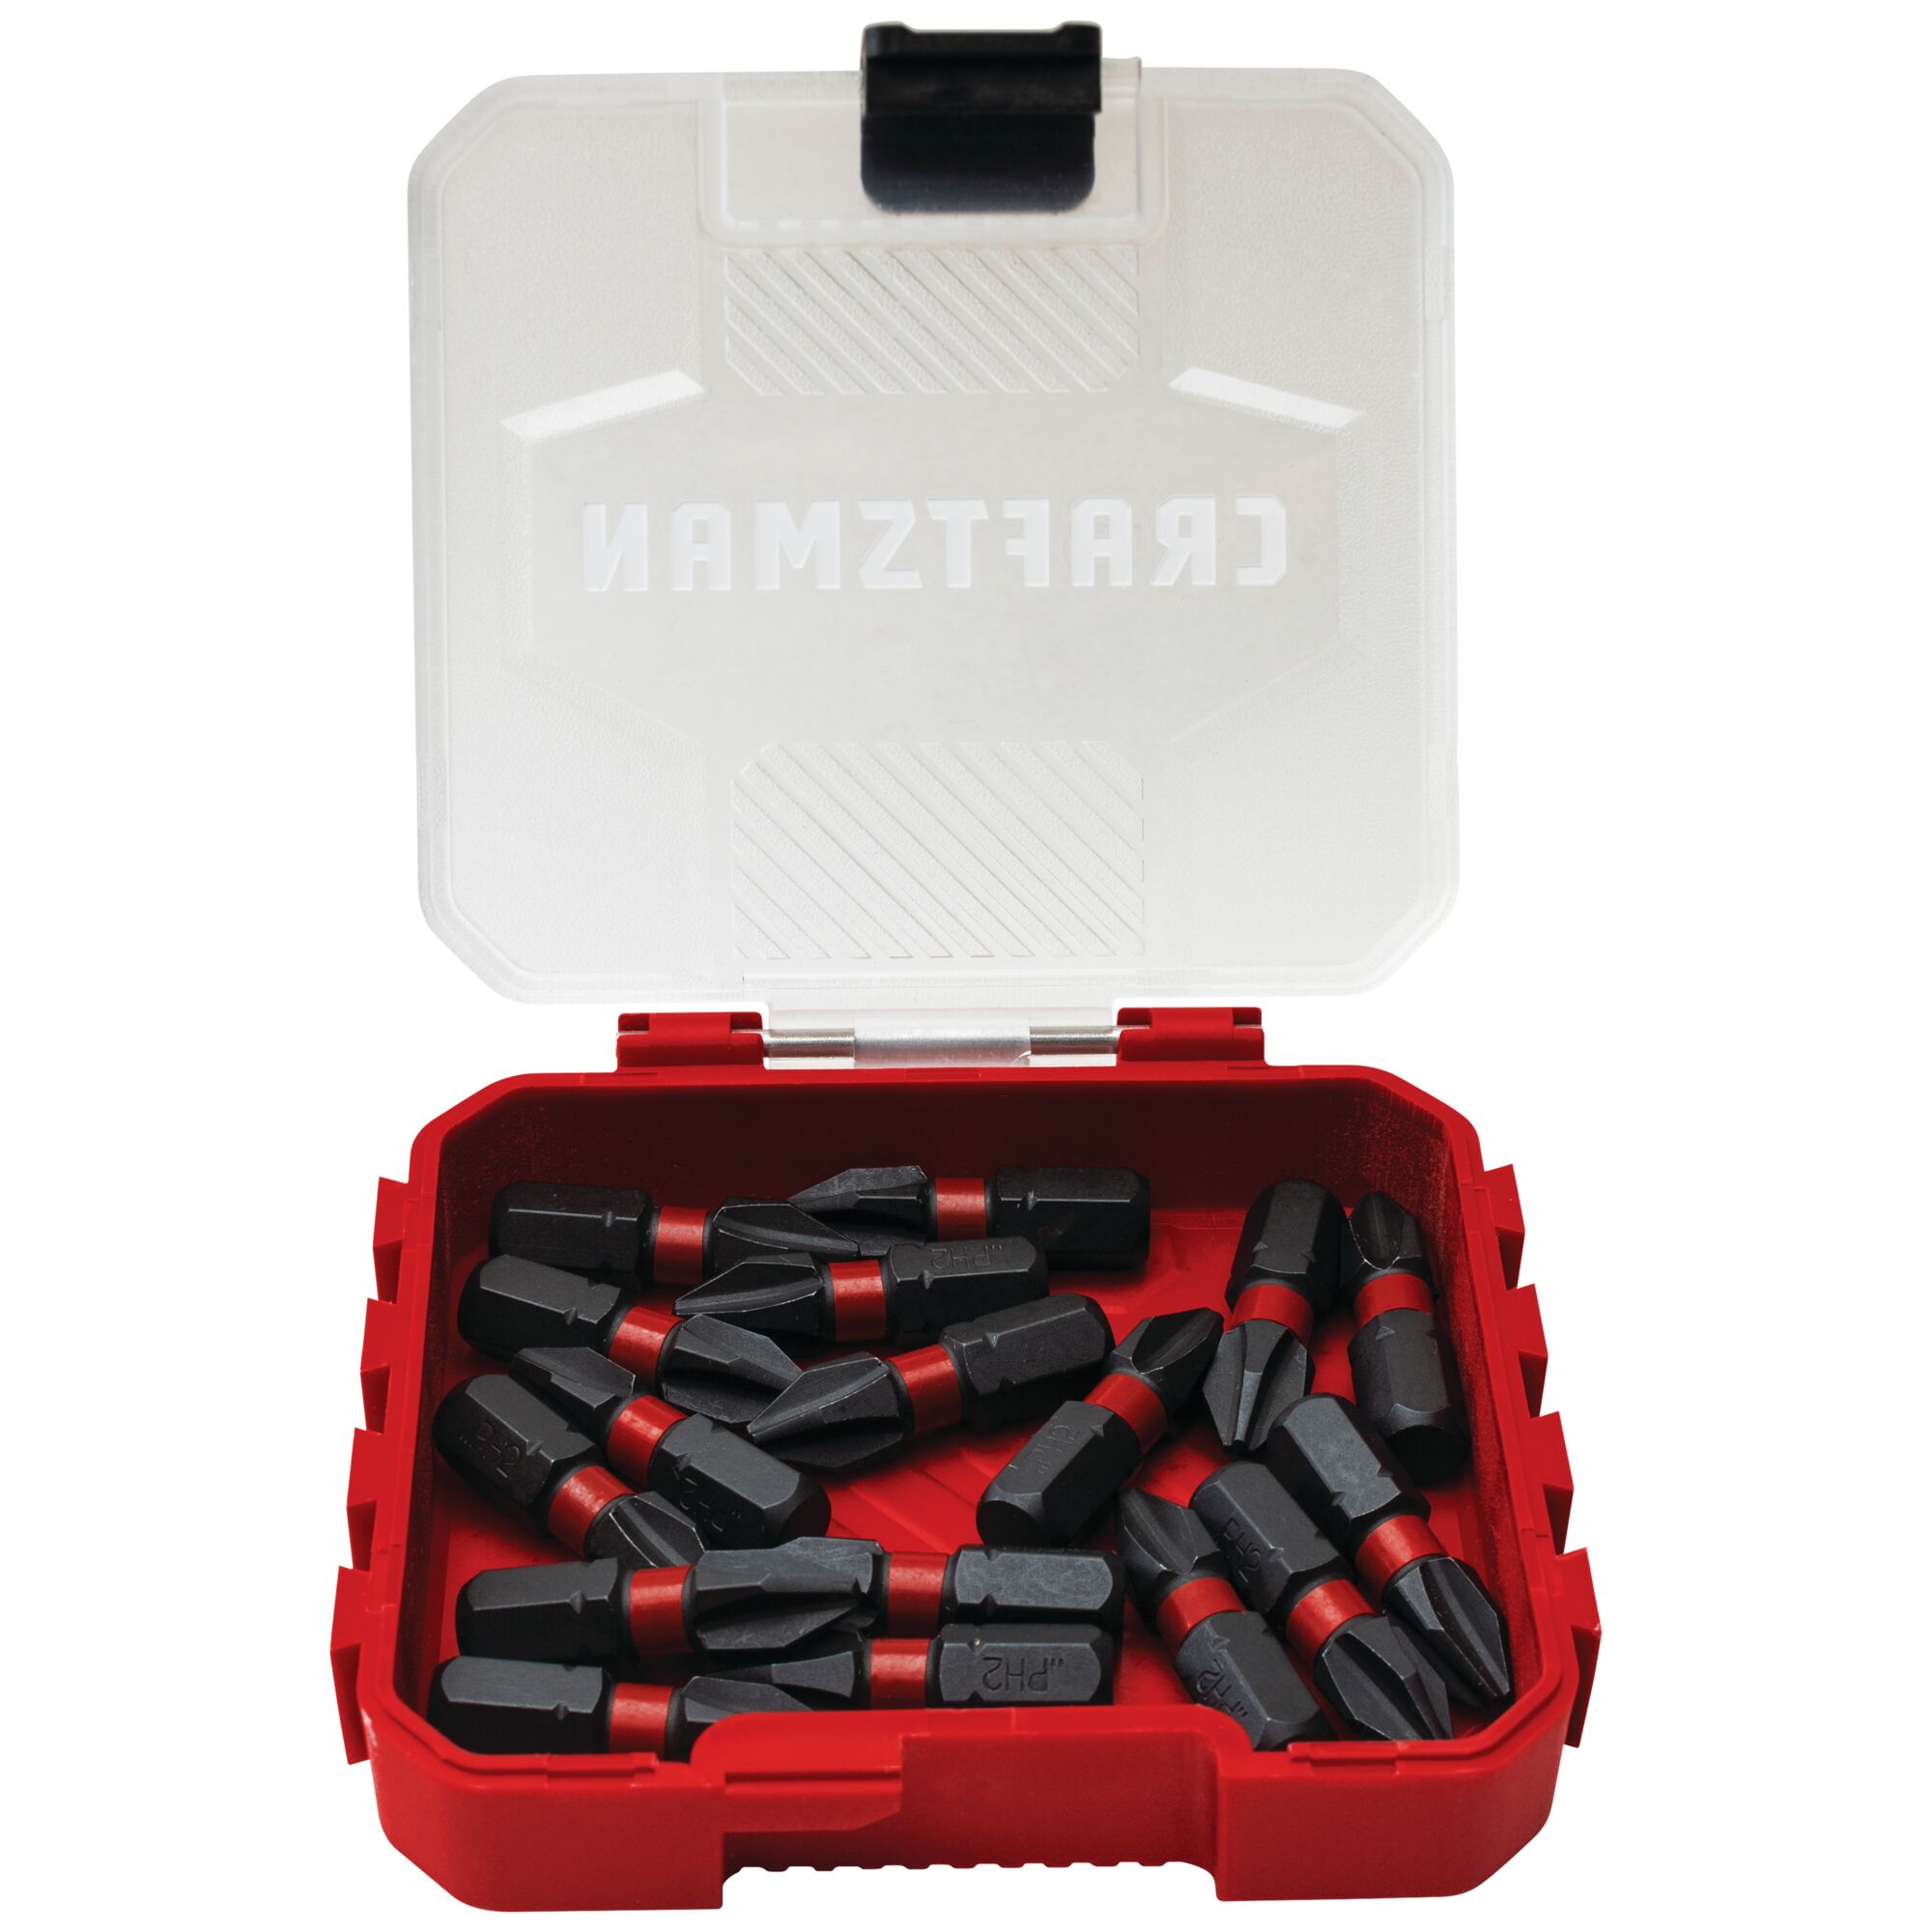 IMPACT RATED 20 Piece 1 inch PHILLIPS Number 2 SCREWDRIVING BITS in plastic case packaging with lid open.